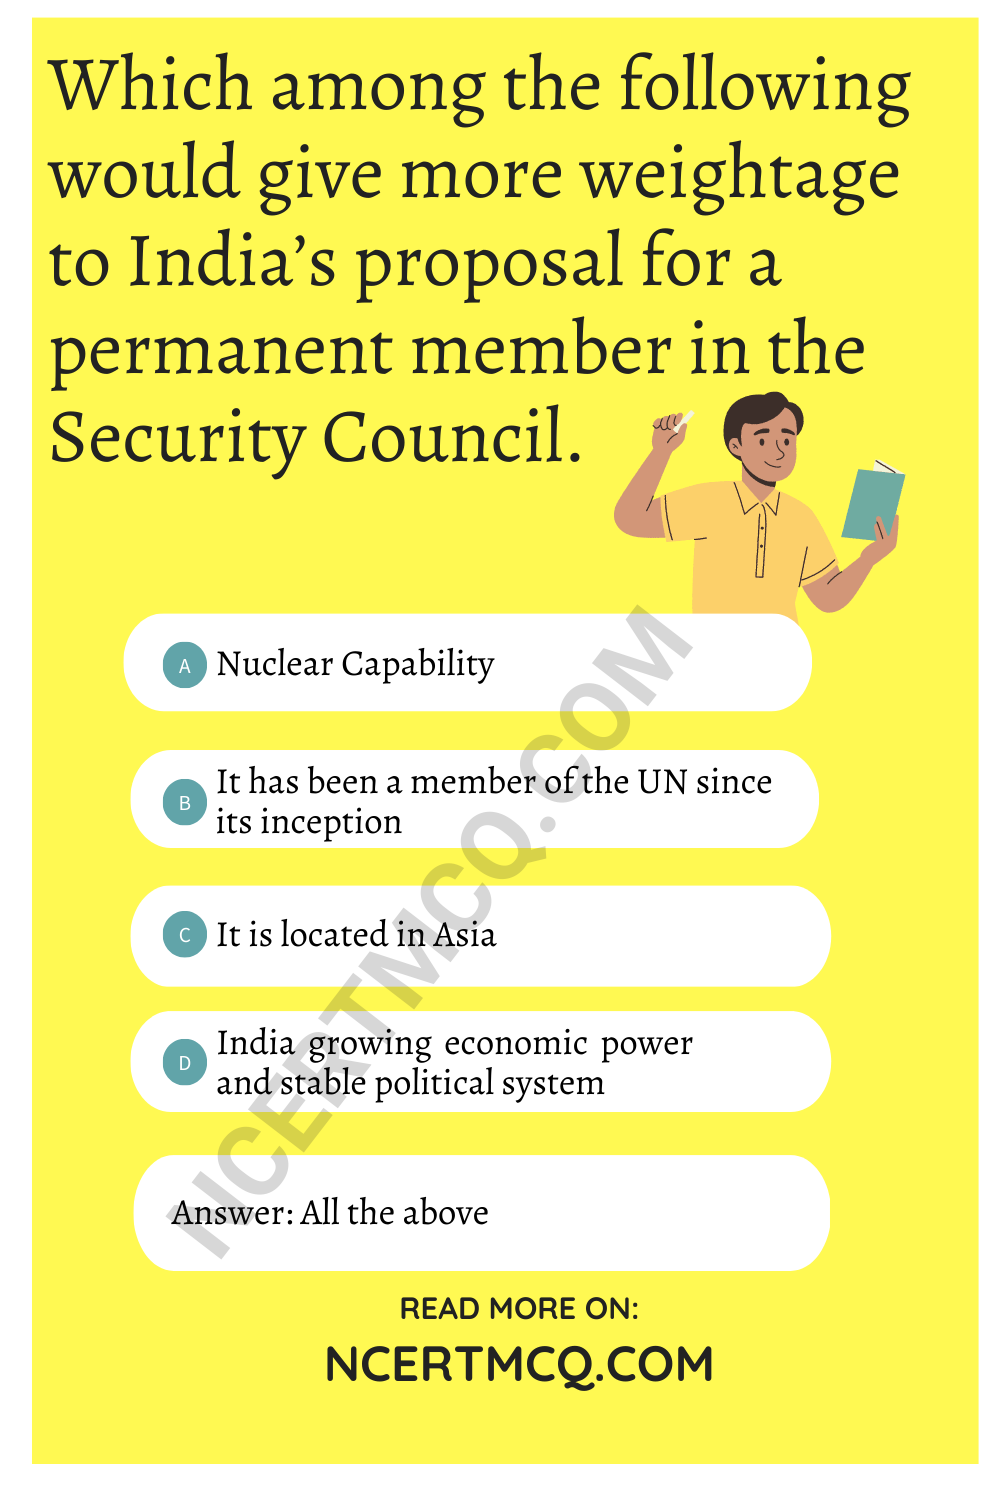 Which among the following would give more weightage to India’s proposal for a permanent member in the Security Council.